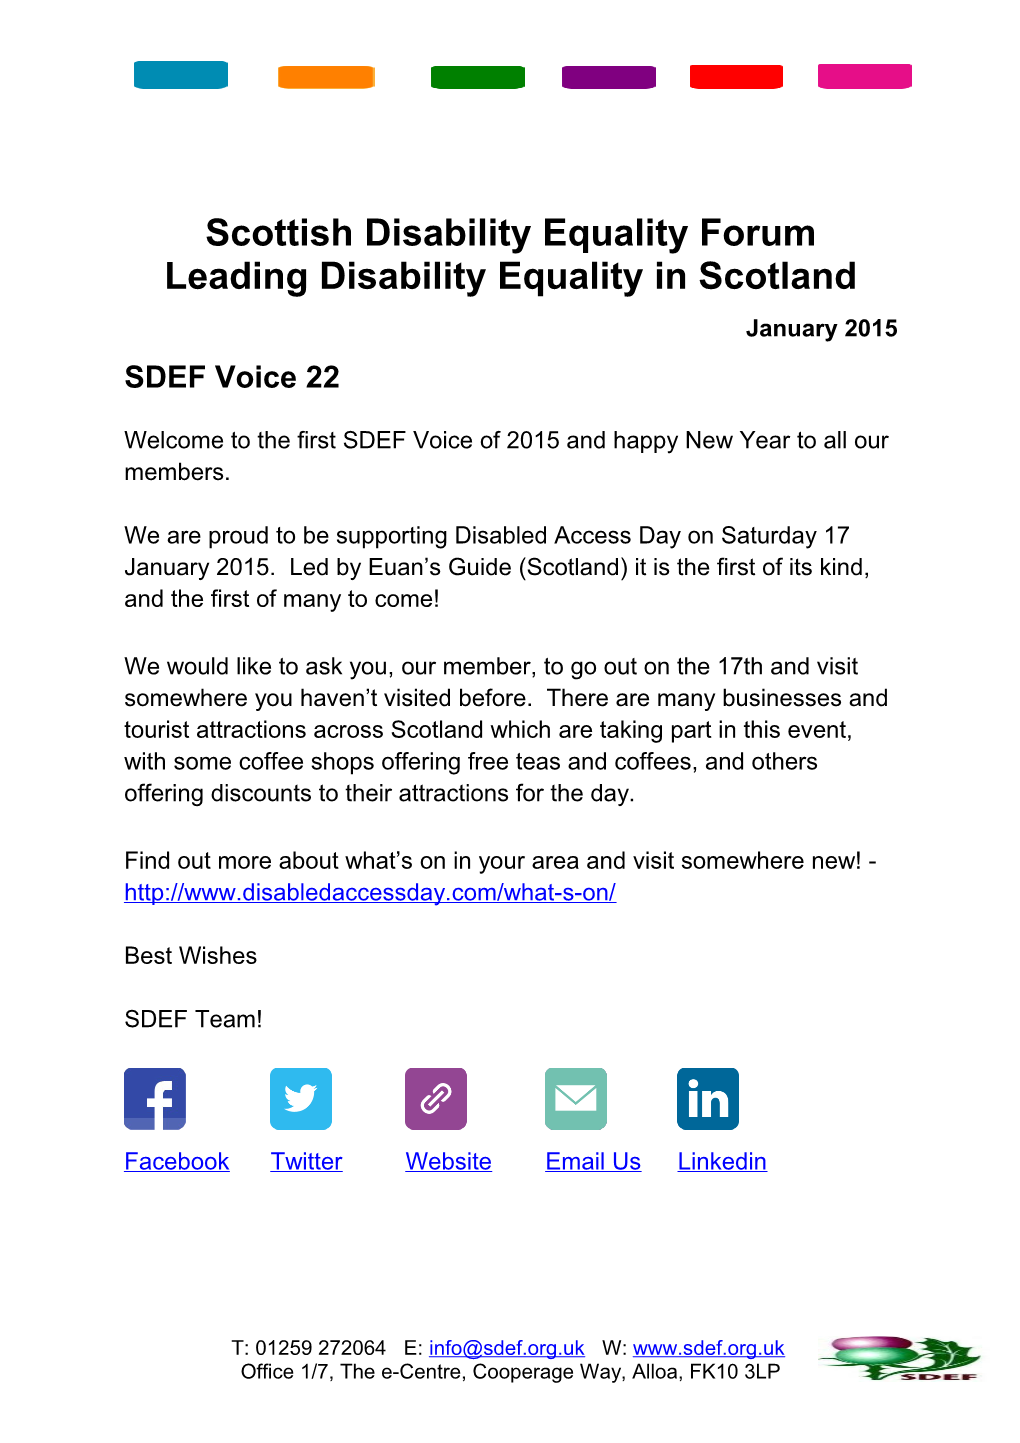 Welcome to the First SDEF Voice of 2015 and Happy New Year to All Our Members